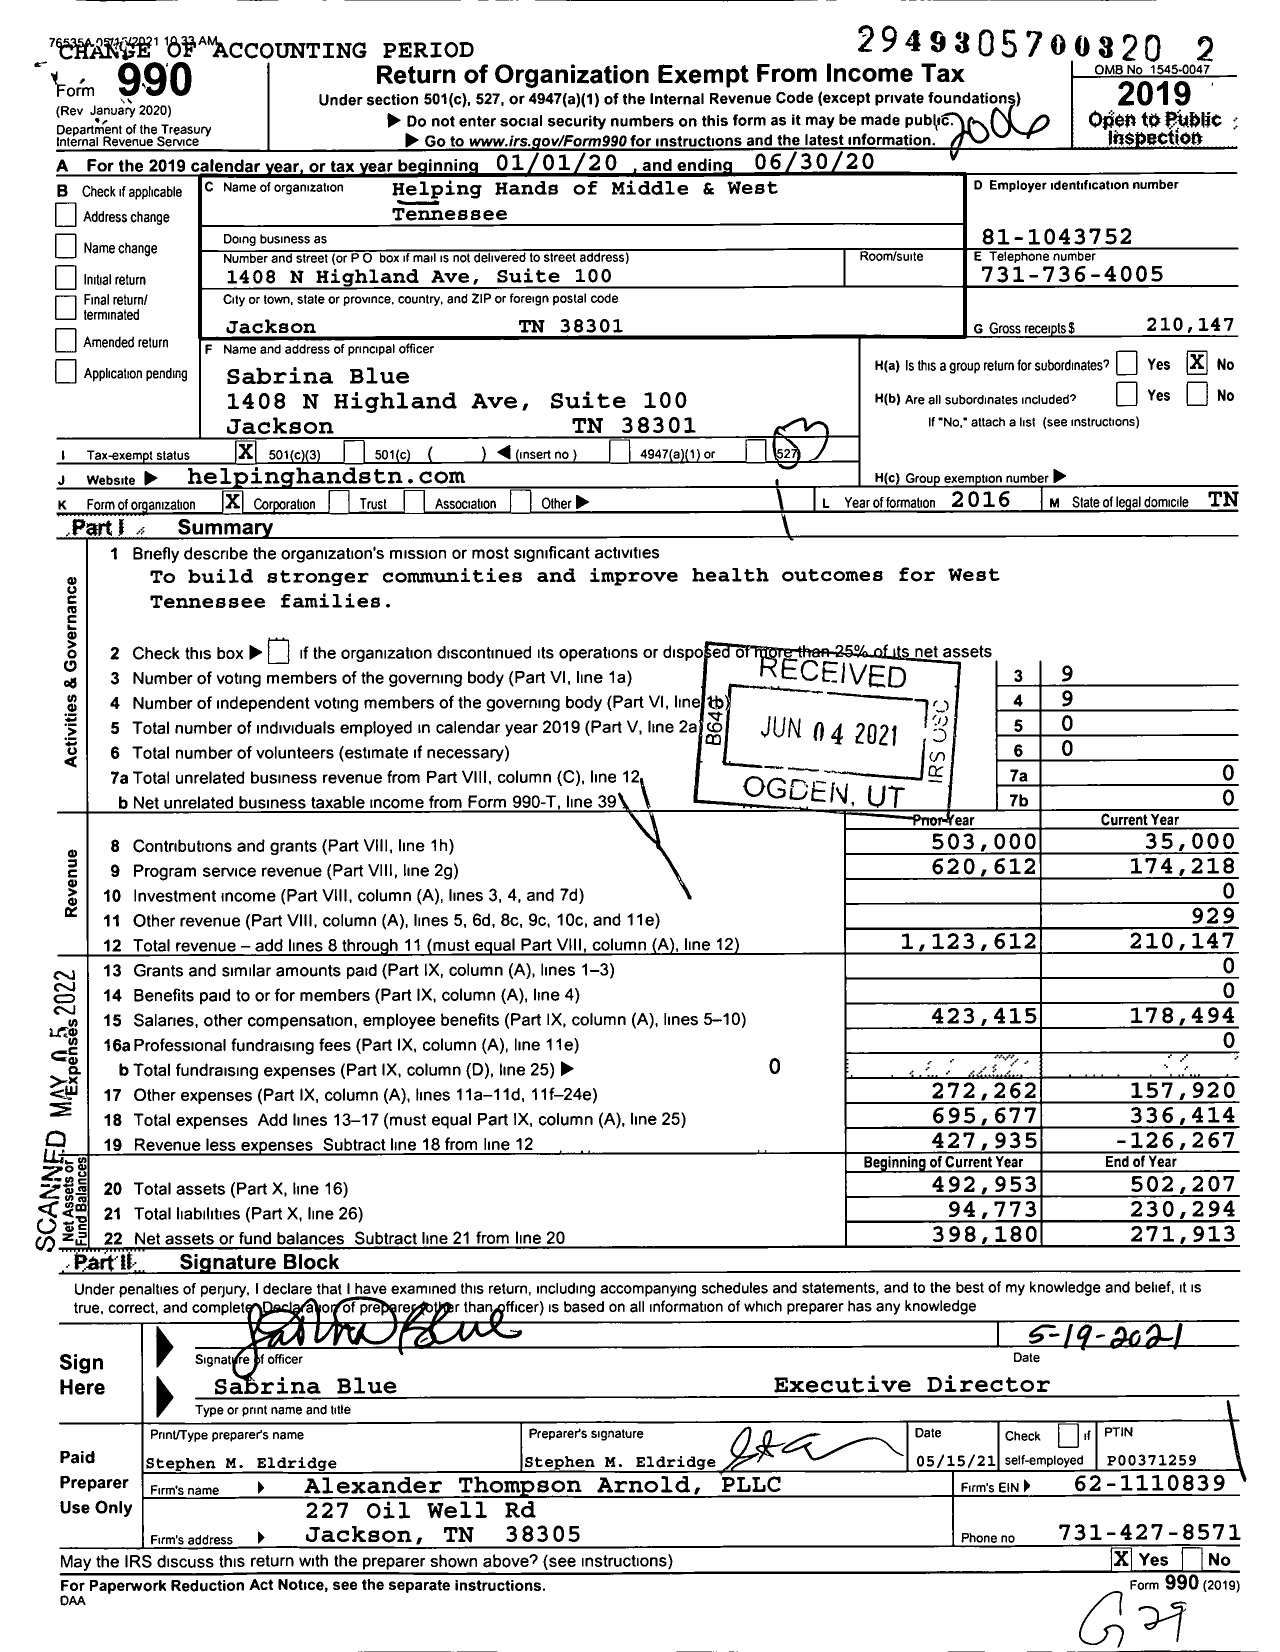 Image of first page of 2019 Form 990 for Helping Hands of Middle and West Tennessee